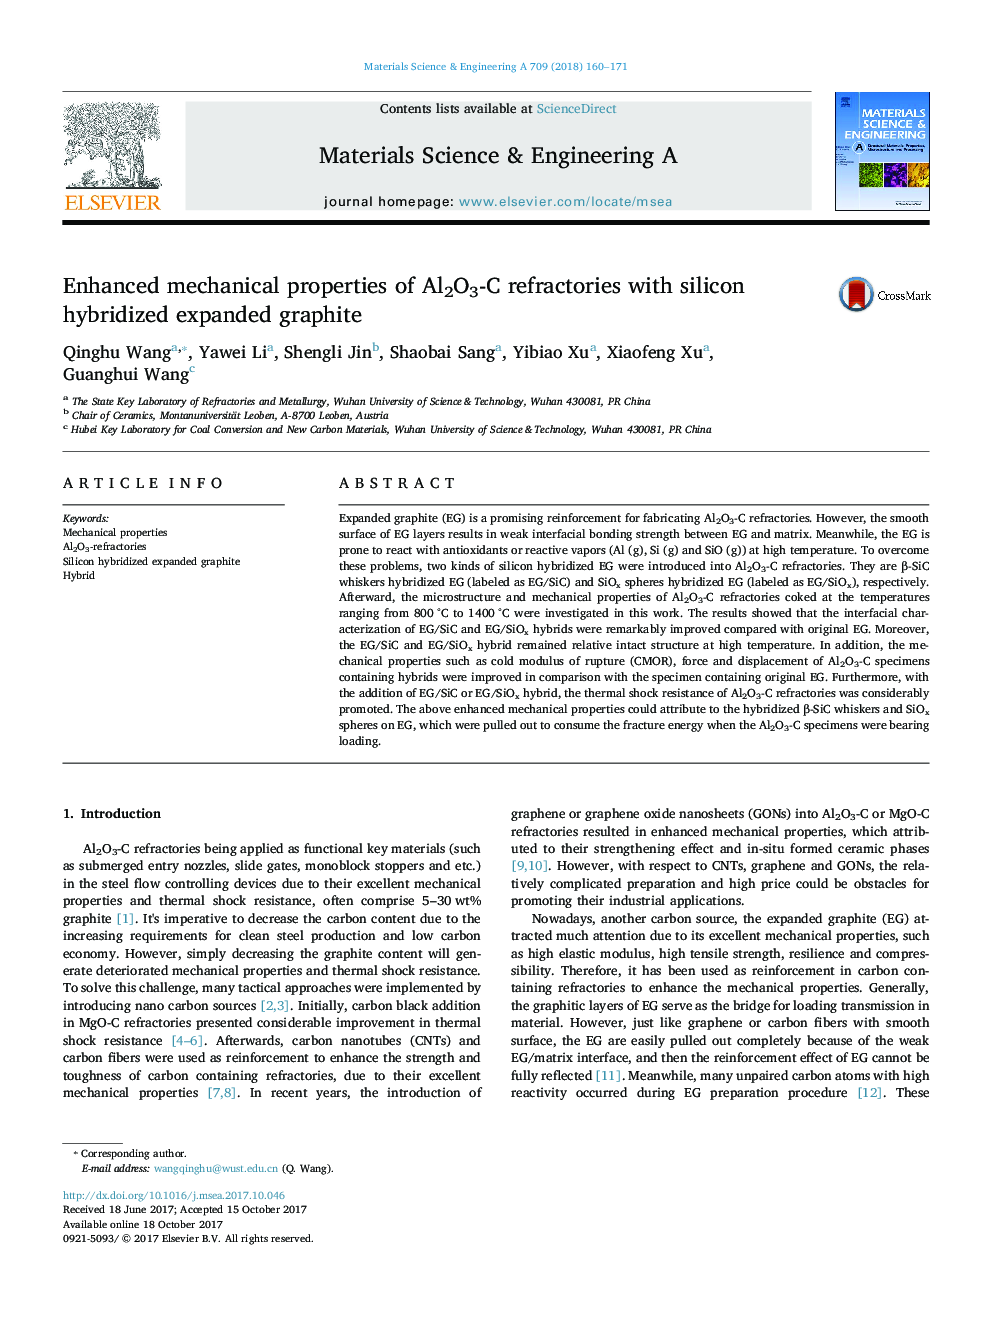 Enhanced mechanical properties of Al2O3-C refractories with silicon hybridized expanded graphite